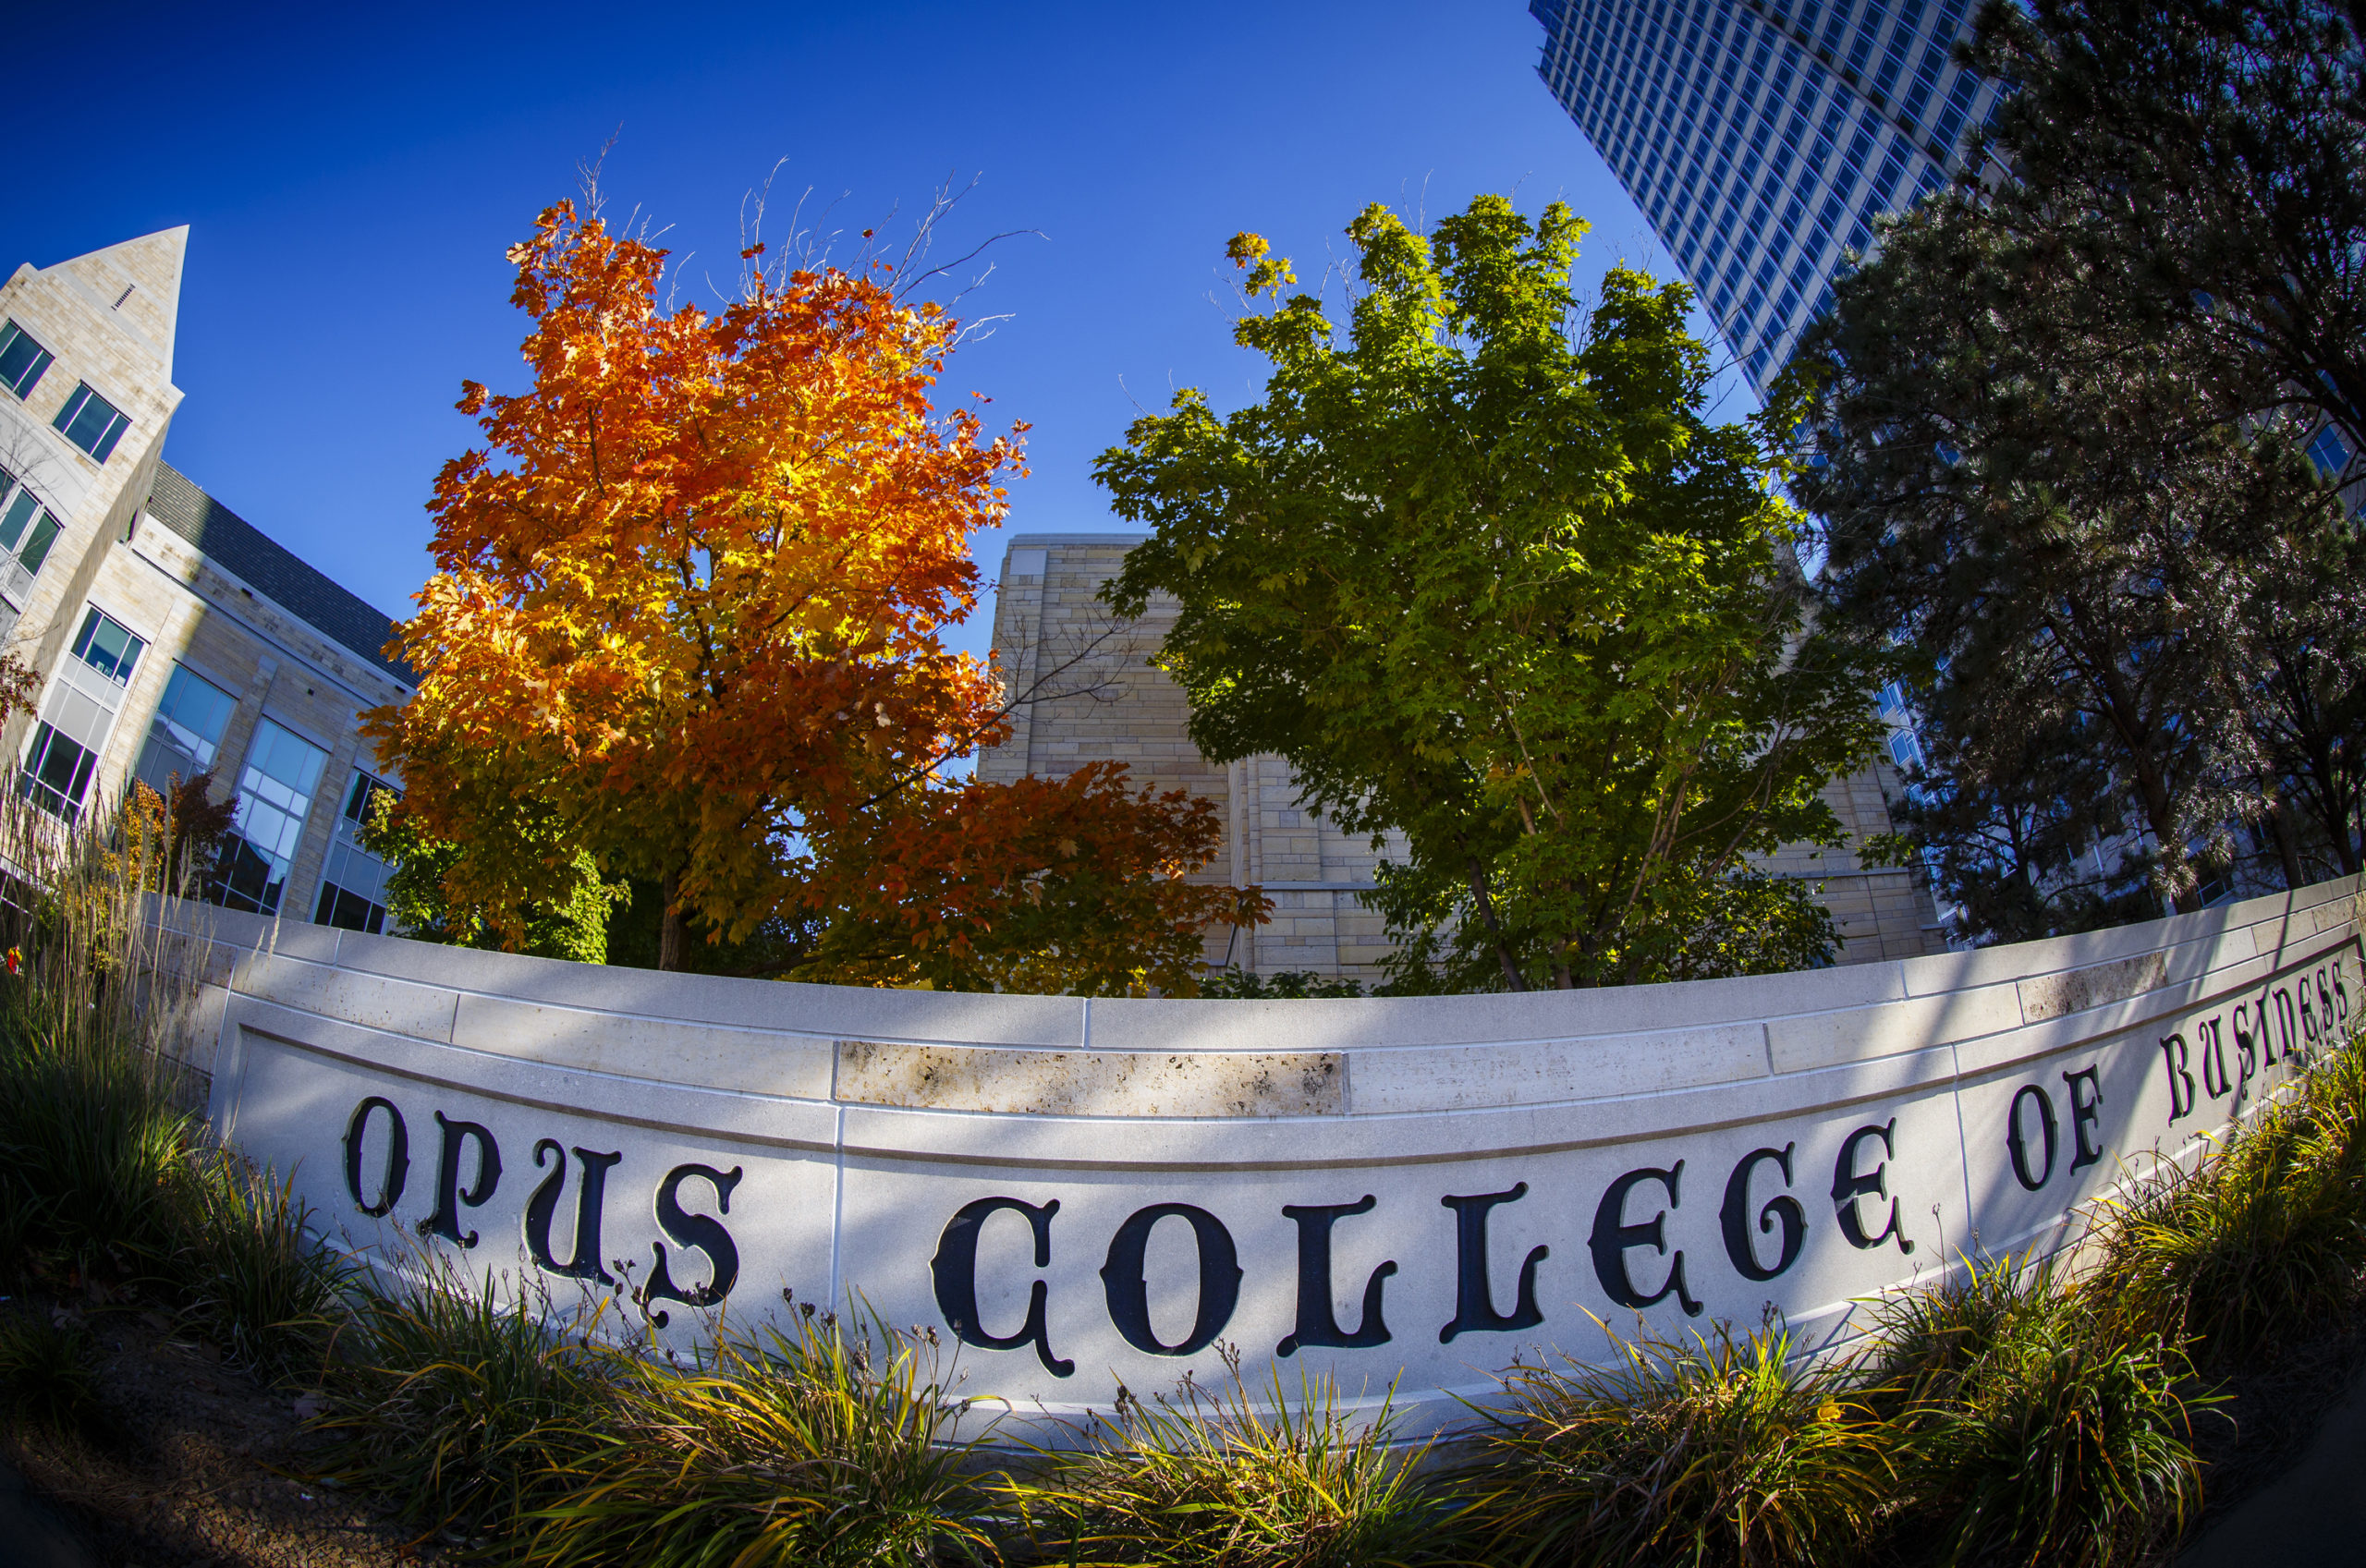 Schulze Hall and a tree with colorful leaves are pictured with the "Opus College of Business" sign and downtown skyscraper on a fall day in Minneapolis on October 10, 2014.